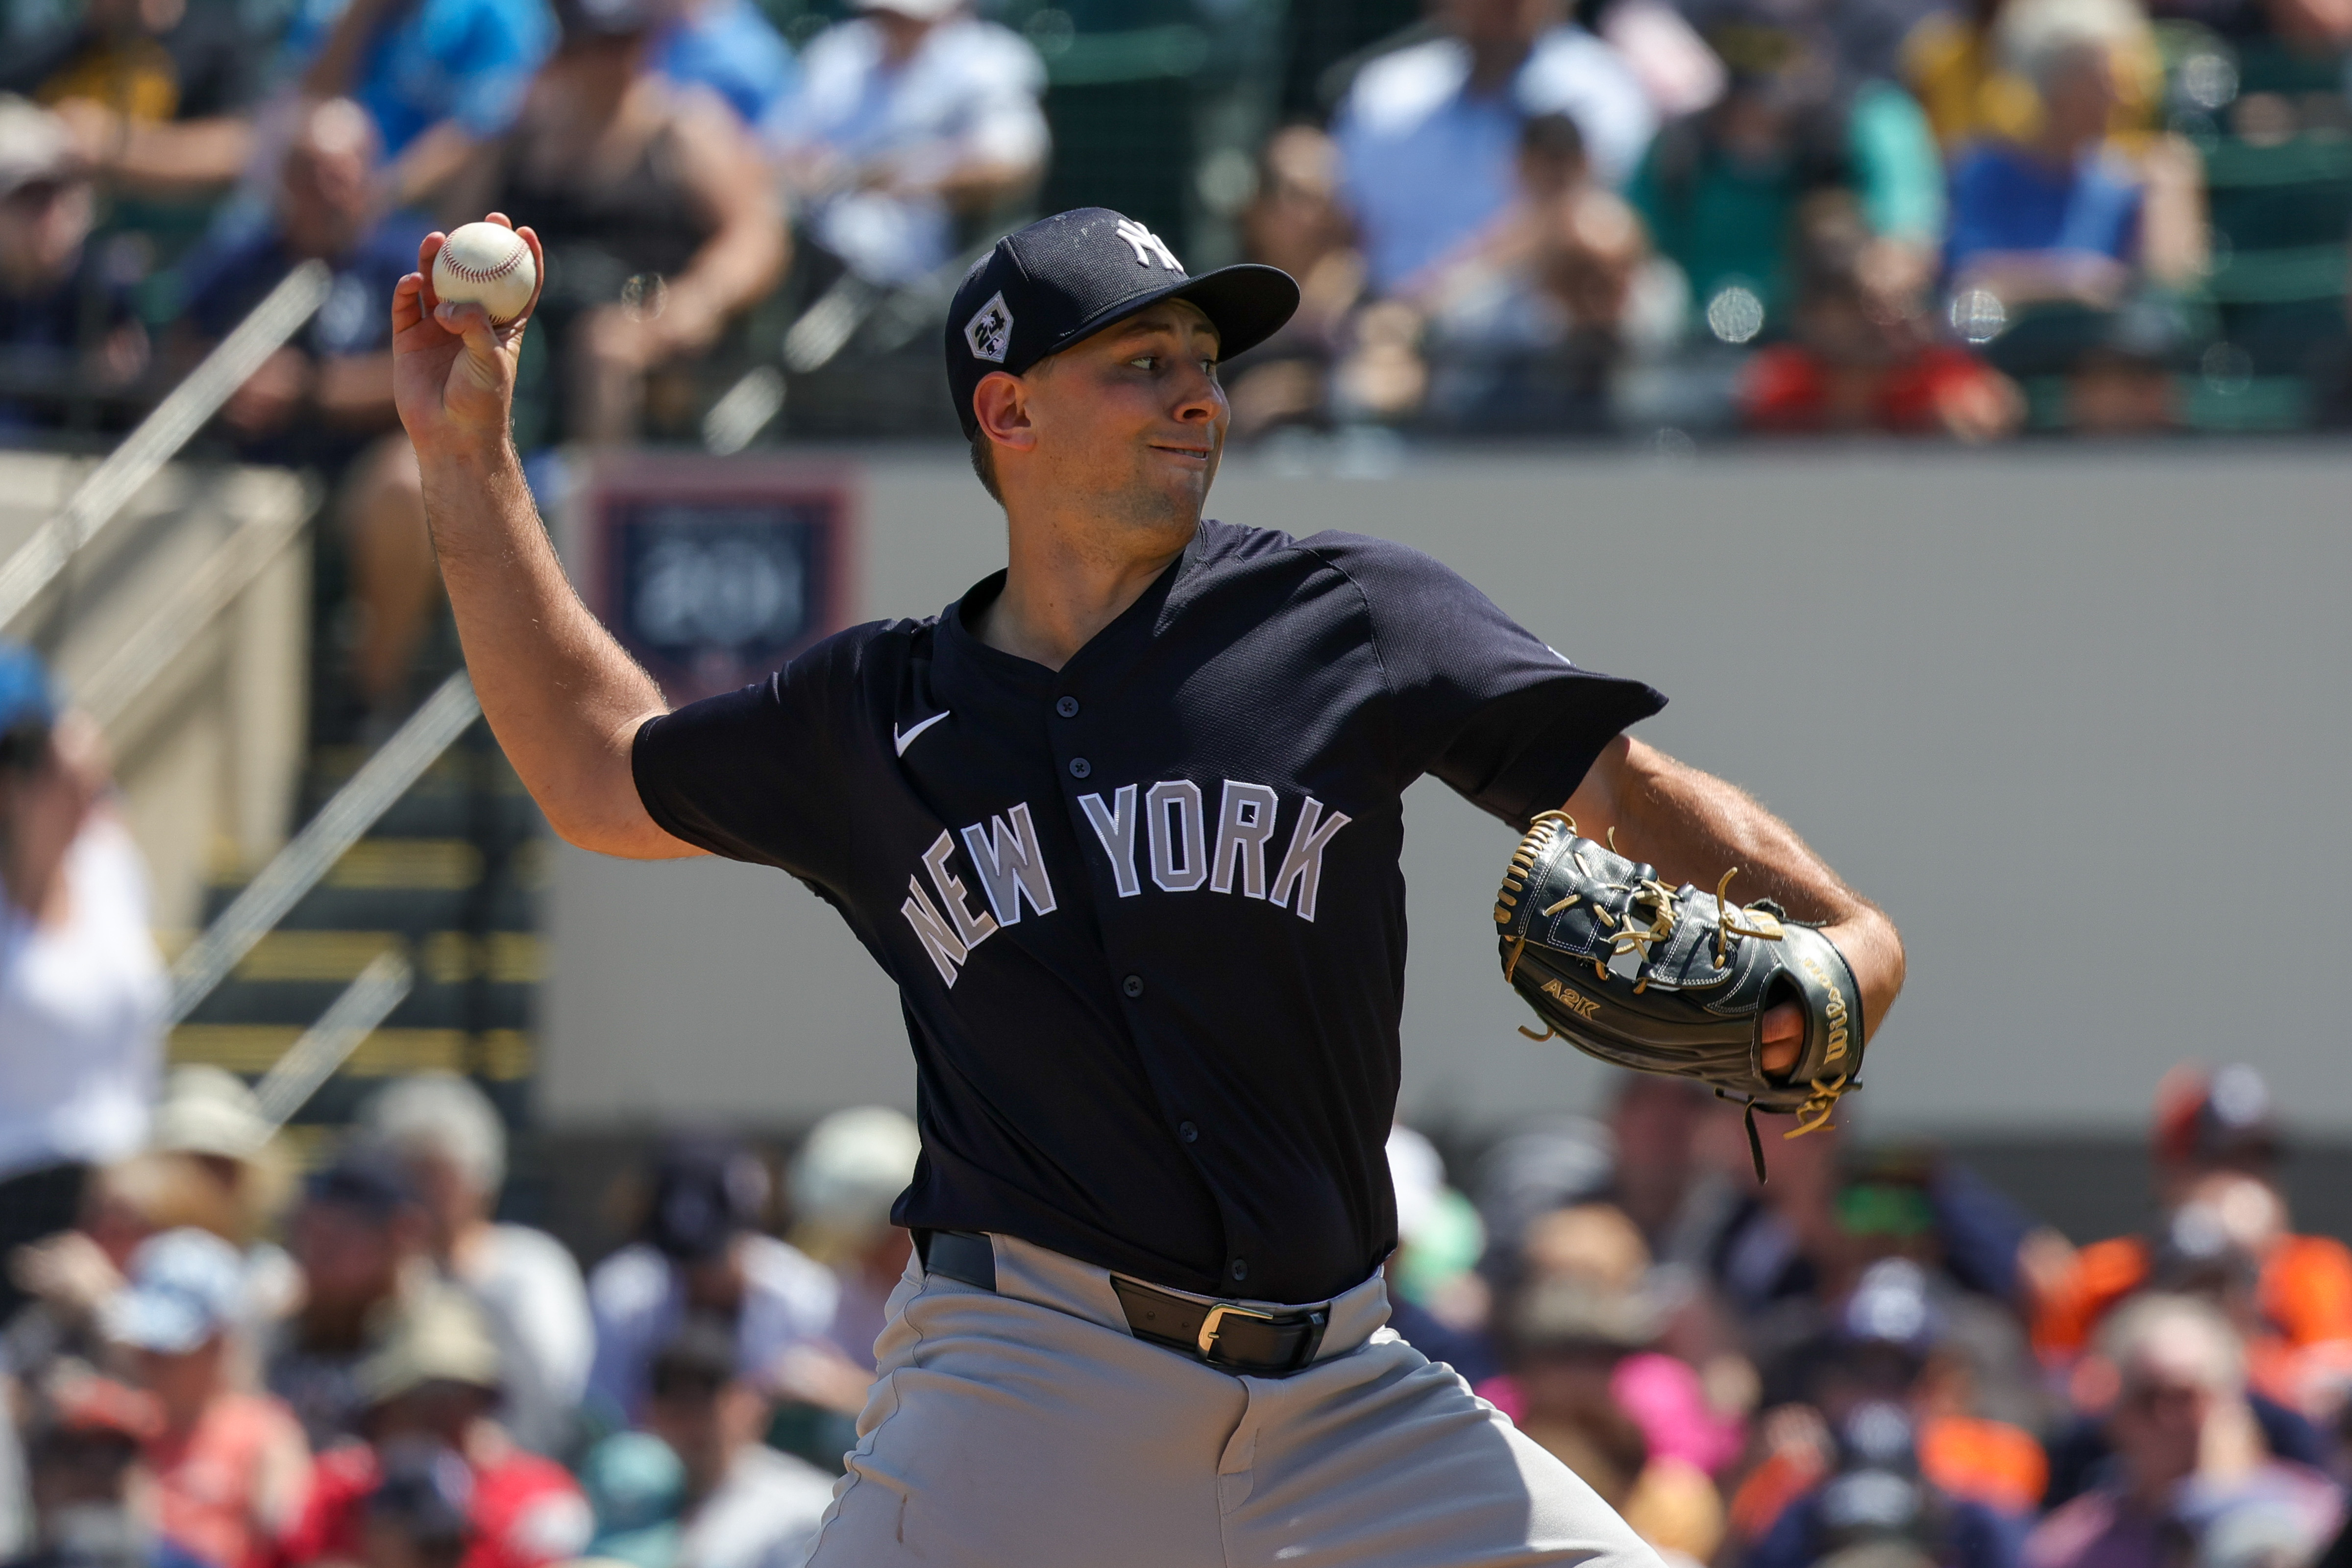 Yankees going with journeyman depth starter as 27th man for doubleheader